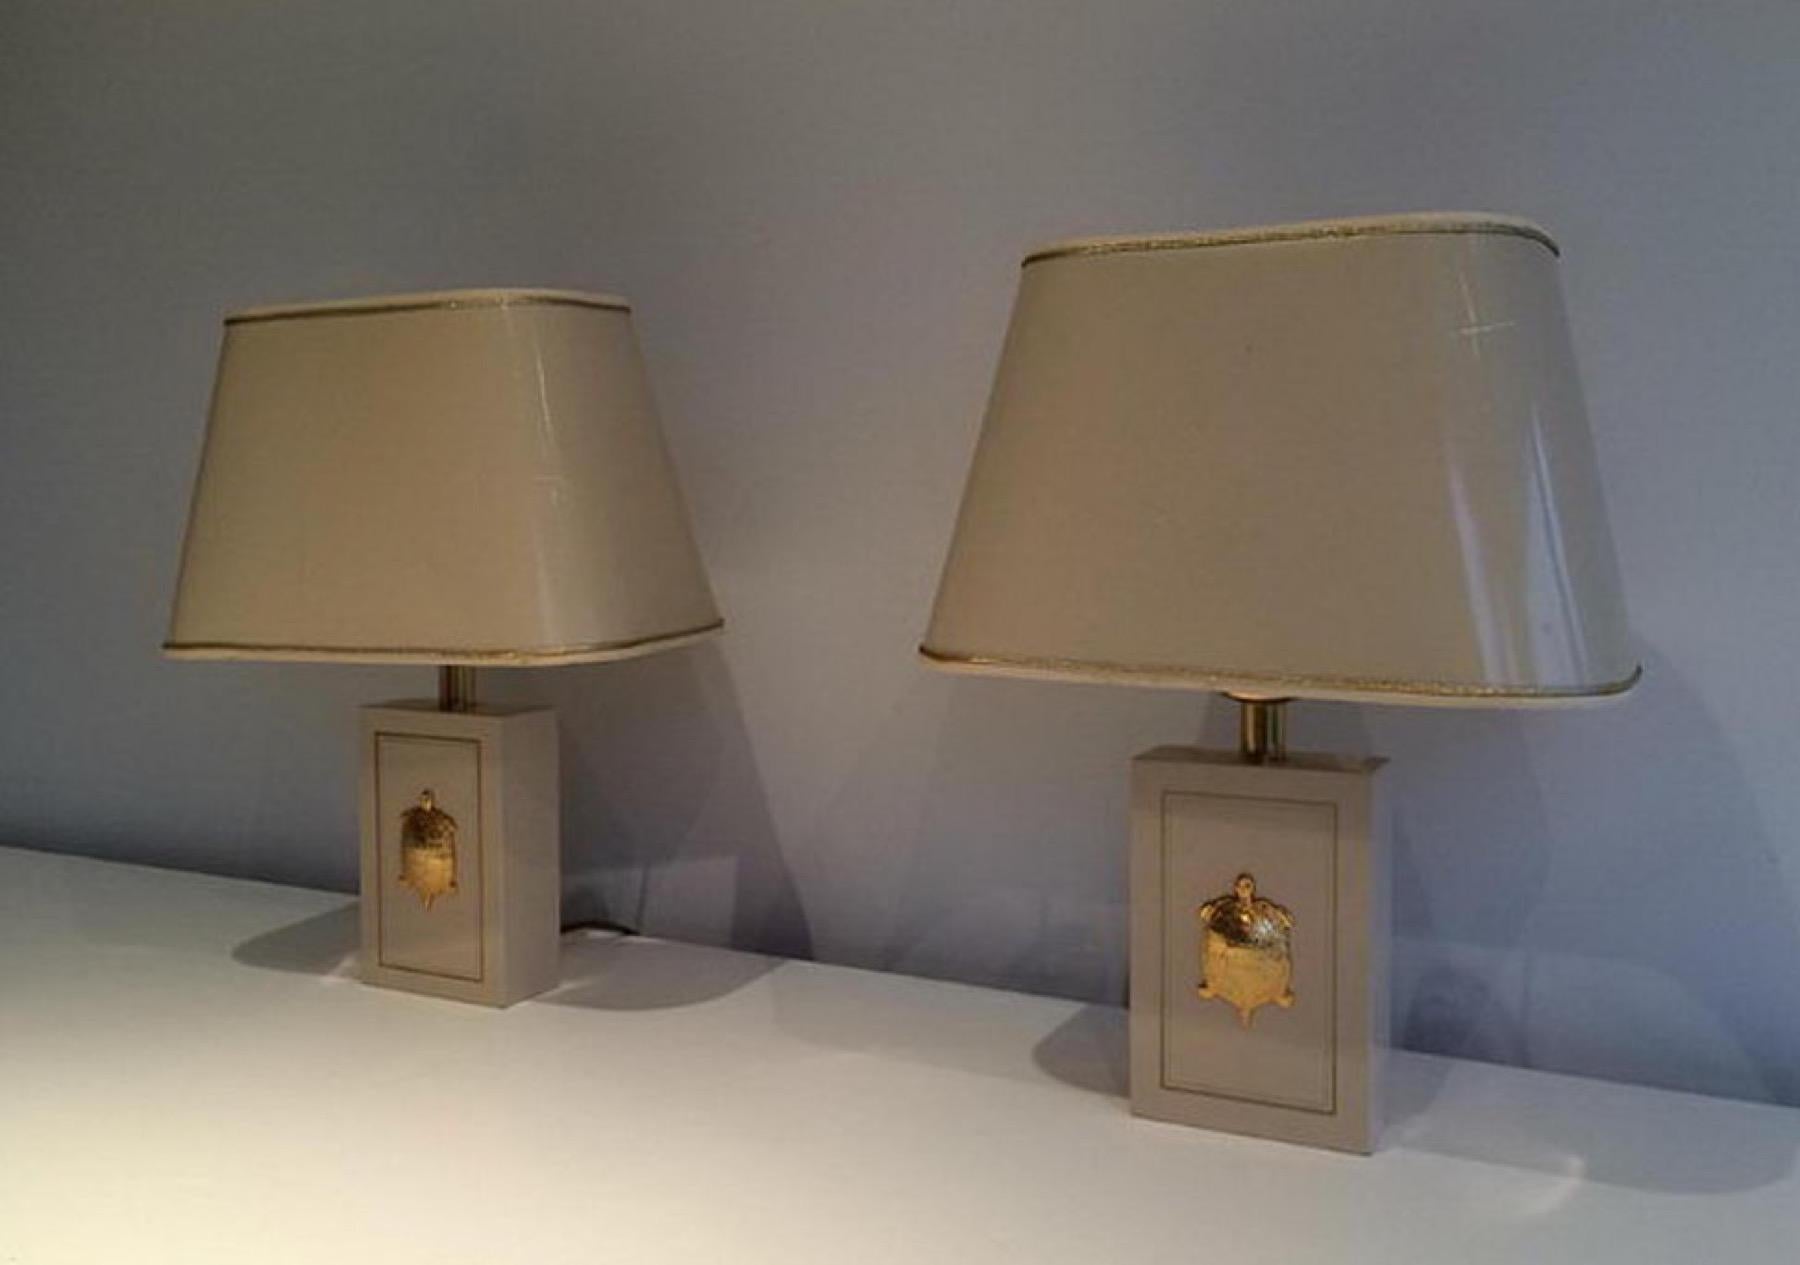 This pair of table lamps are made of a white lacqued wood with gilt turtles ornaments. This is a French work, circa 1970.